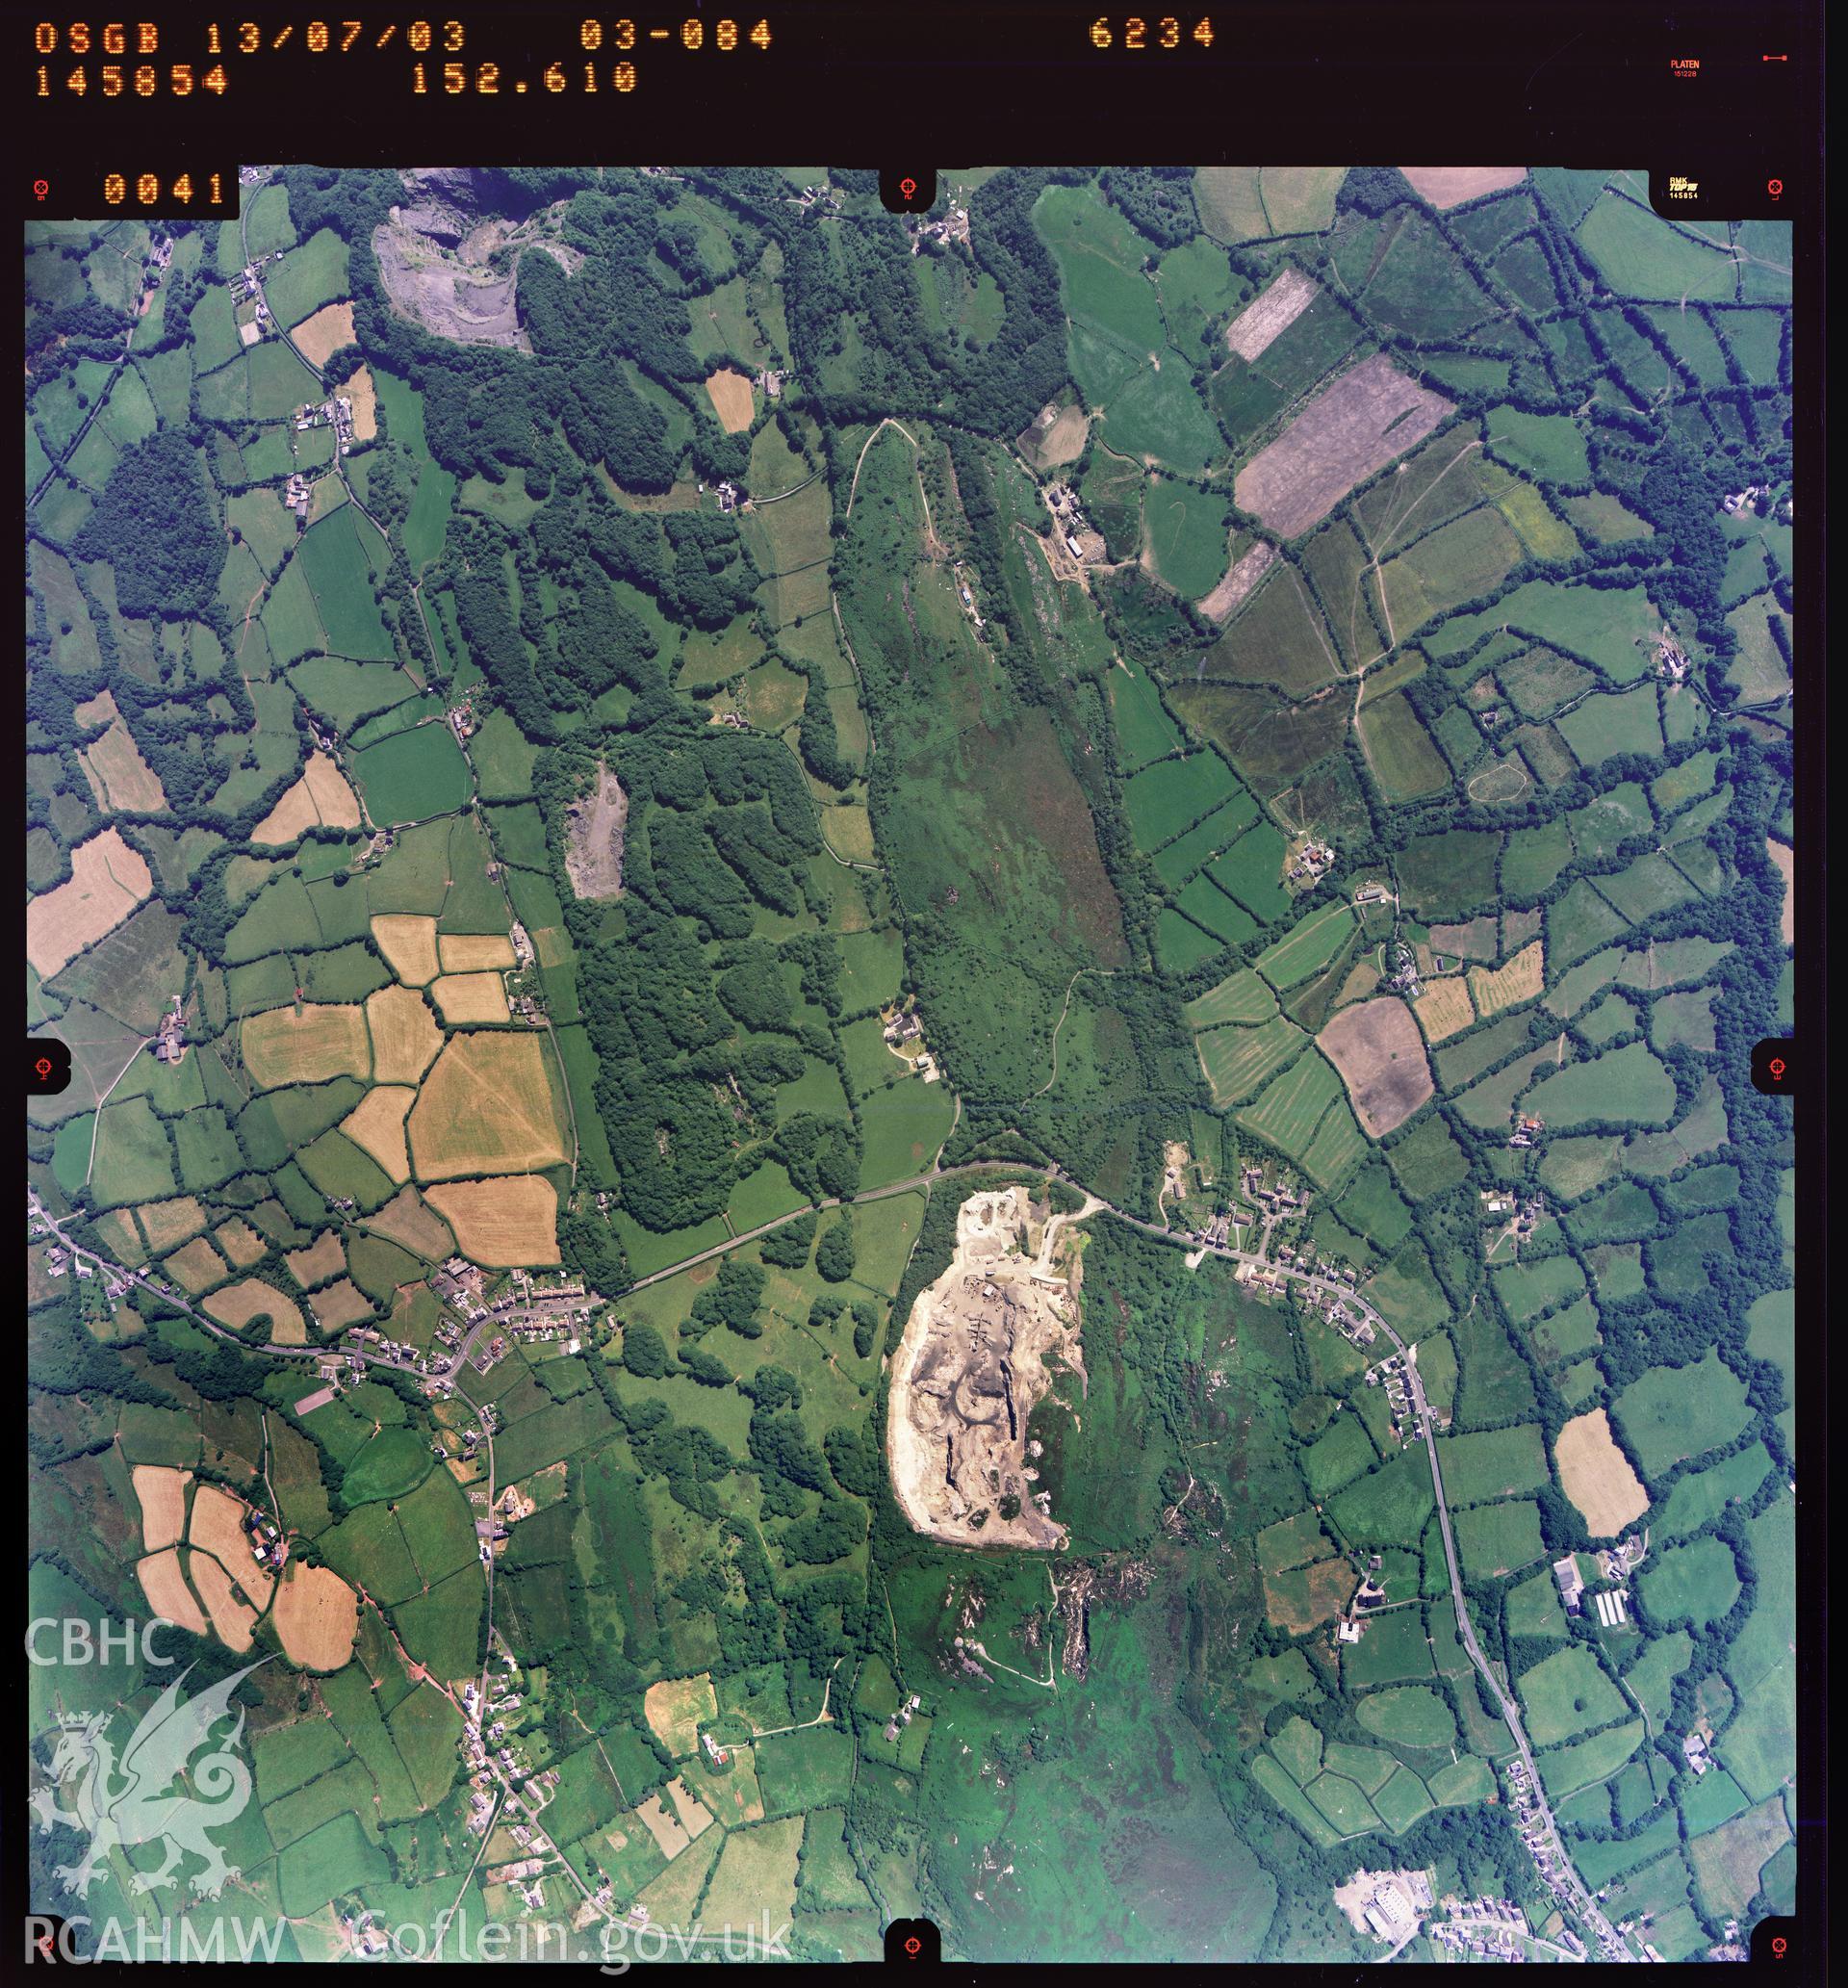 Digitized copy of a colour aerial photograph showing the Carmel area, taken by Ordnance Survey, 2003.